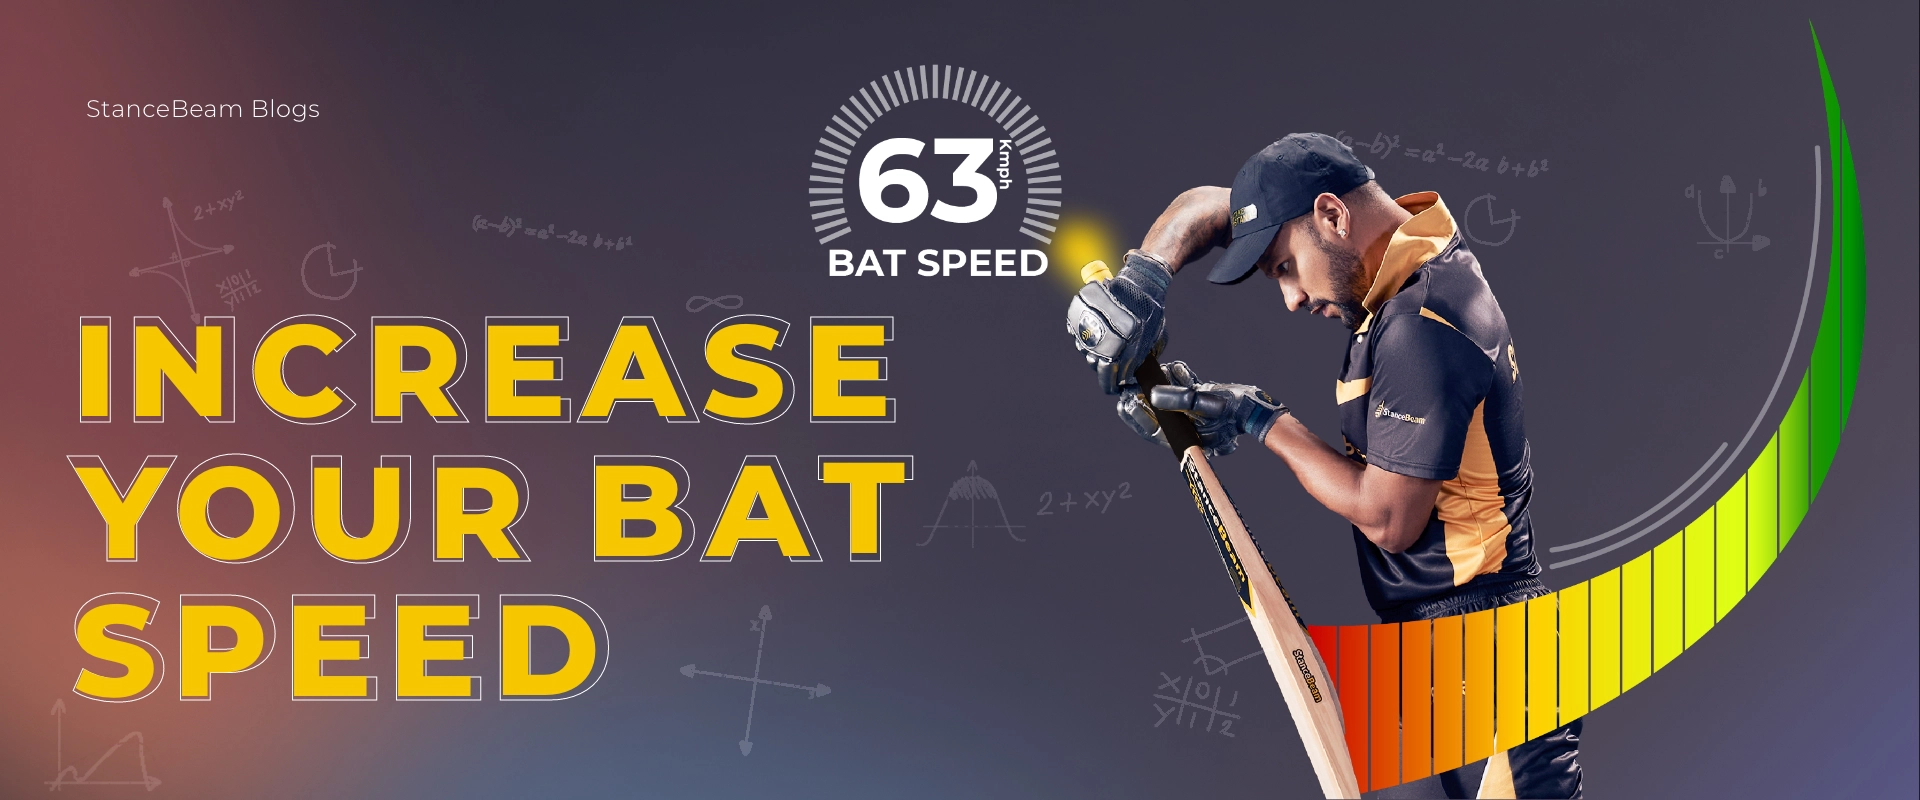 How to Increase and Improve Bat Speed in Cricket